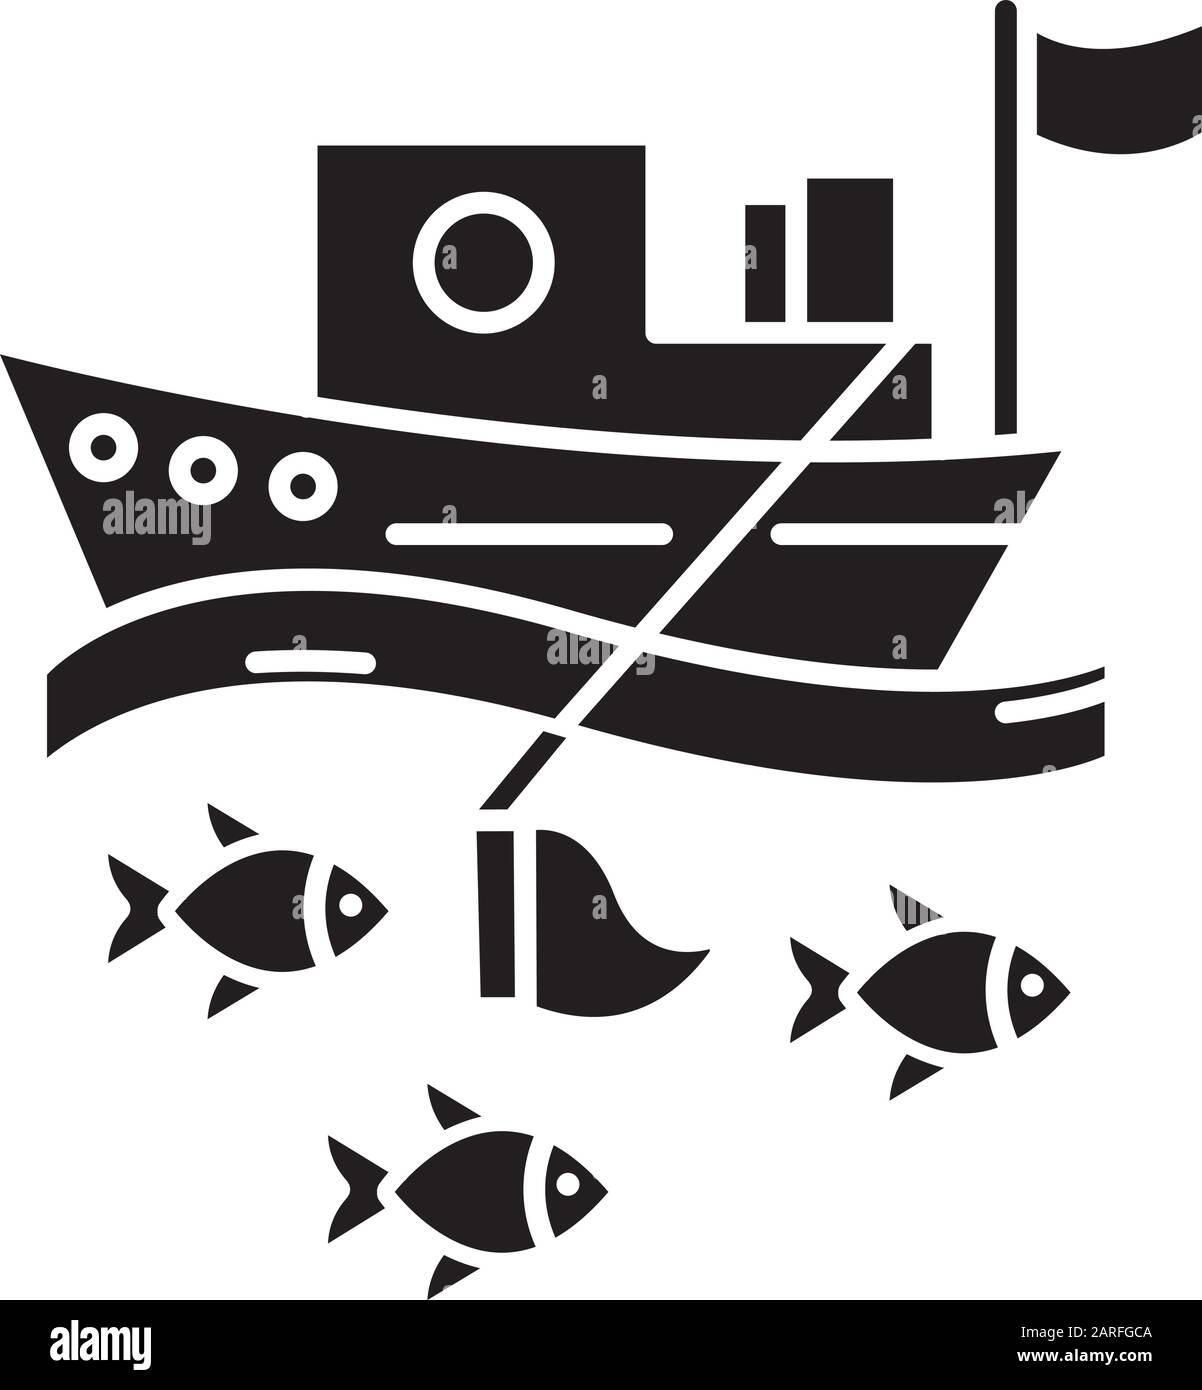 Fishing industry glyph icon. blue color icon. Fishery sector. Commercial fishing activity. Trawler in sea. Business in ocean. Silhouette symbol. Negat Stock Vector